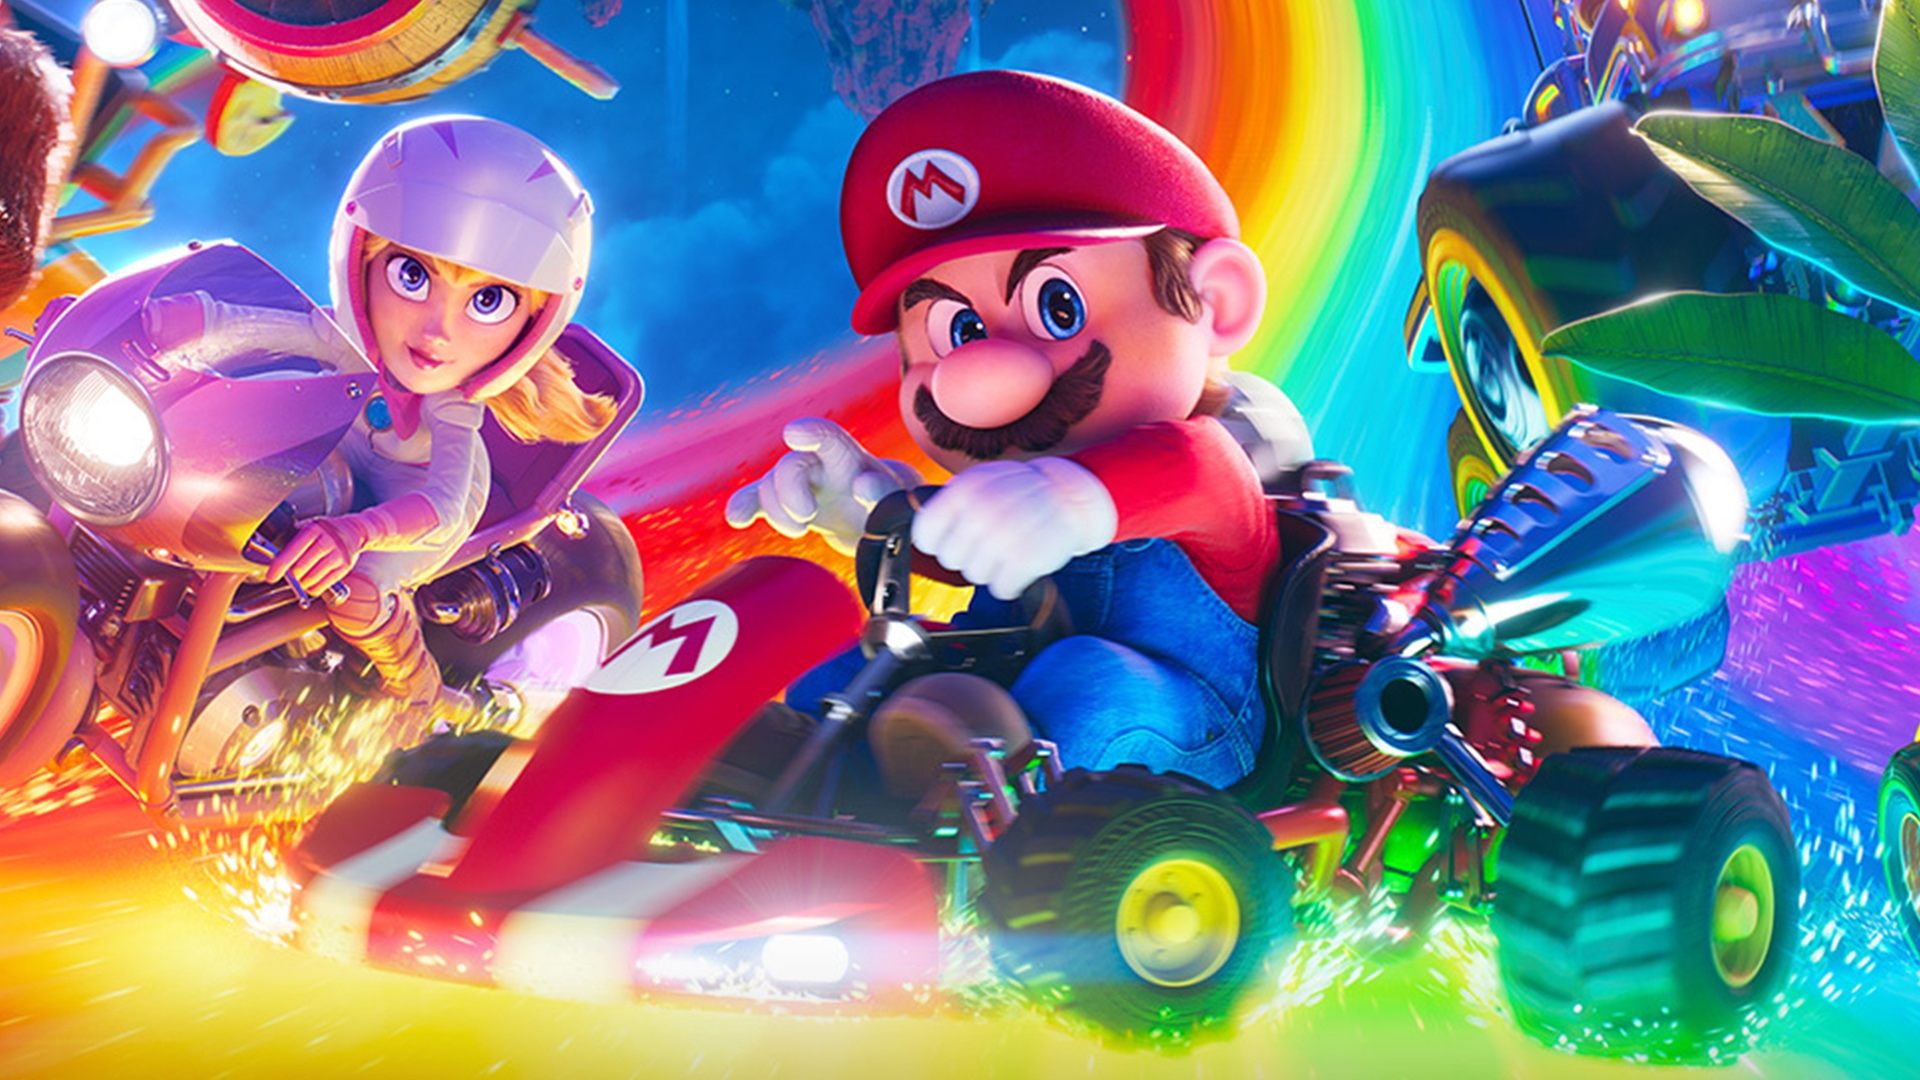 Super Mario Bros Movie 2 potential release date, cast and more